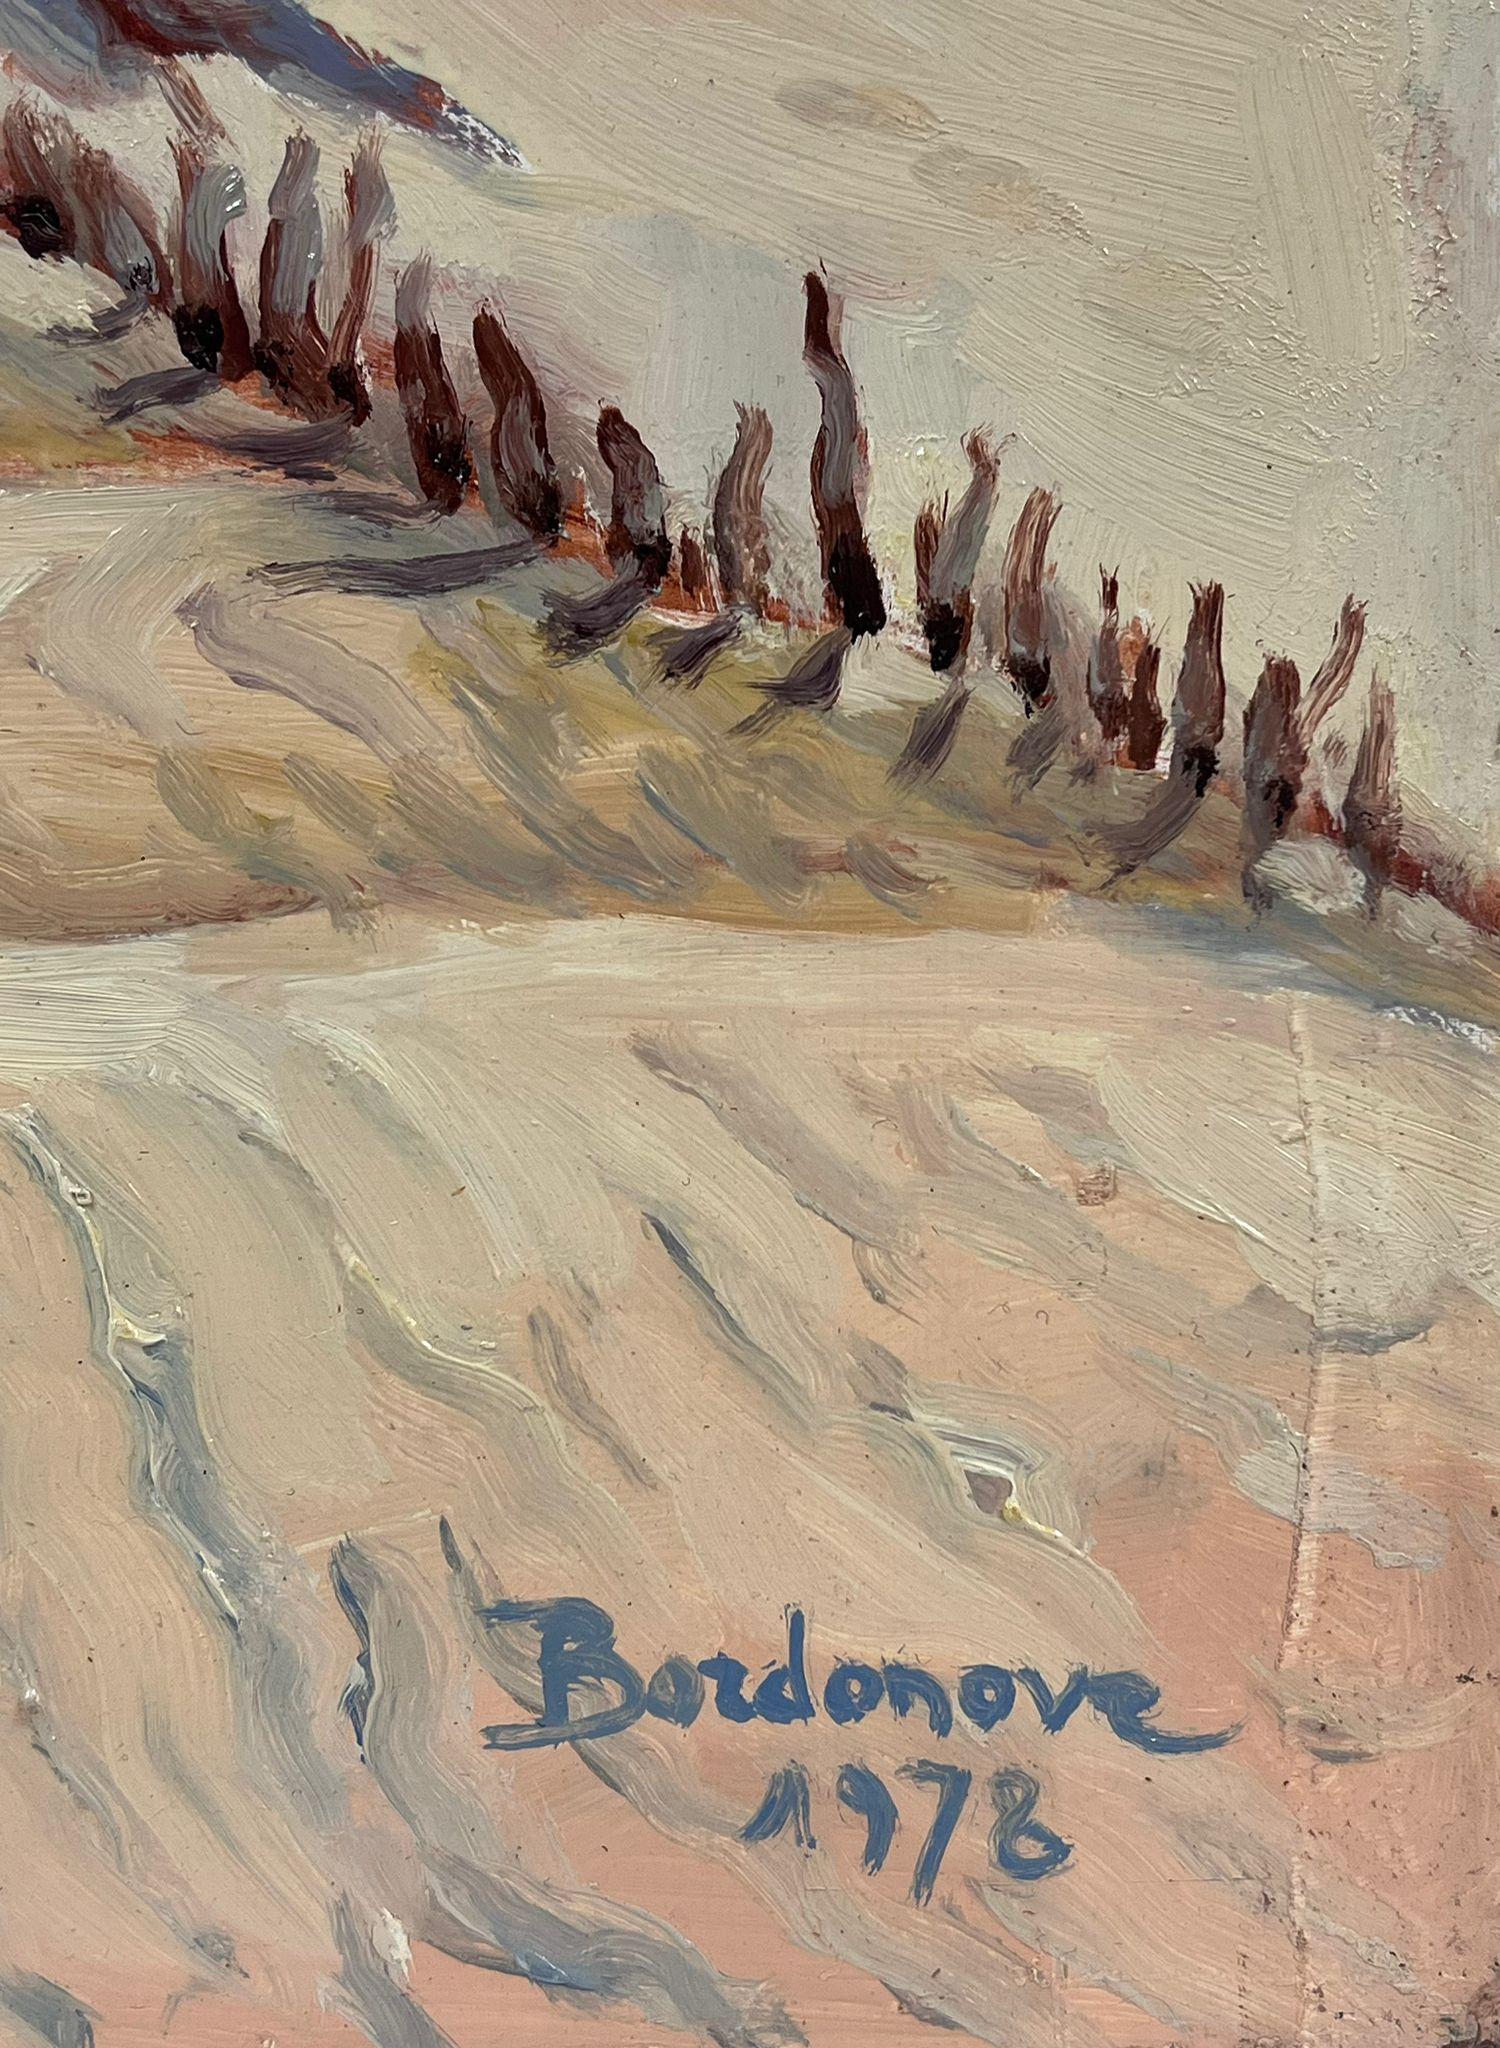 Sand Dunes
by Georges Bordonave (French contemporary)  
signed oil painting on board, unframed
dated 1978
unframed: 20 x 24 inches
condition: very good
provenance: from a large private collection of this artists work, western Paris, France. 